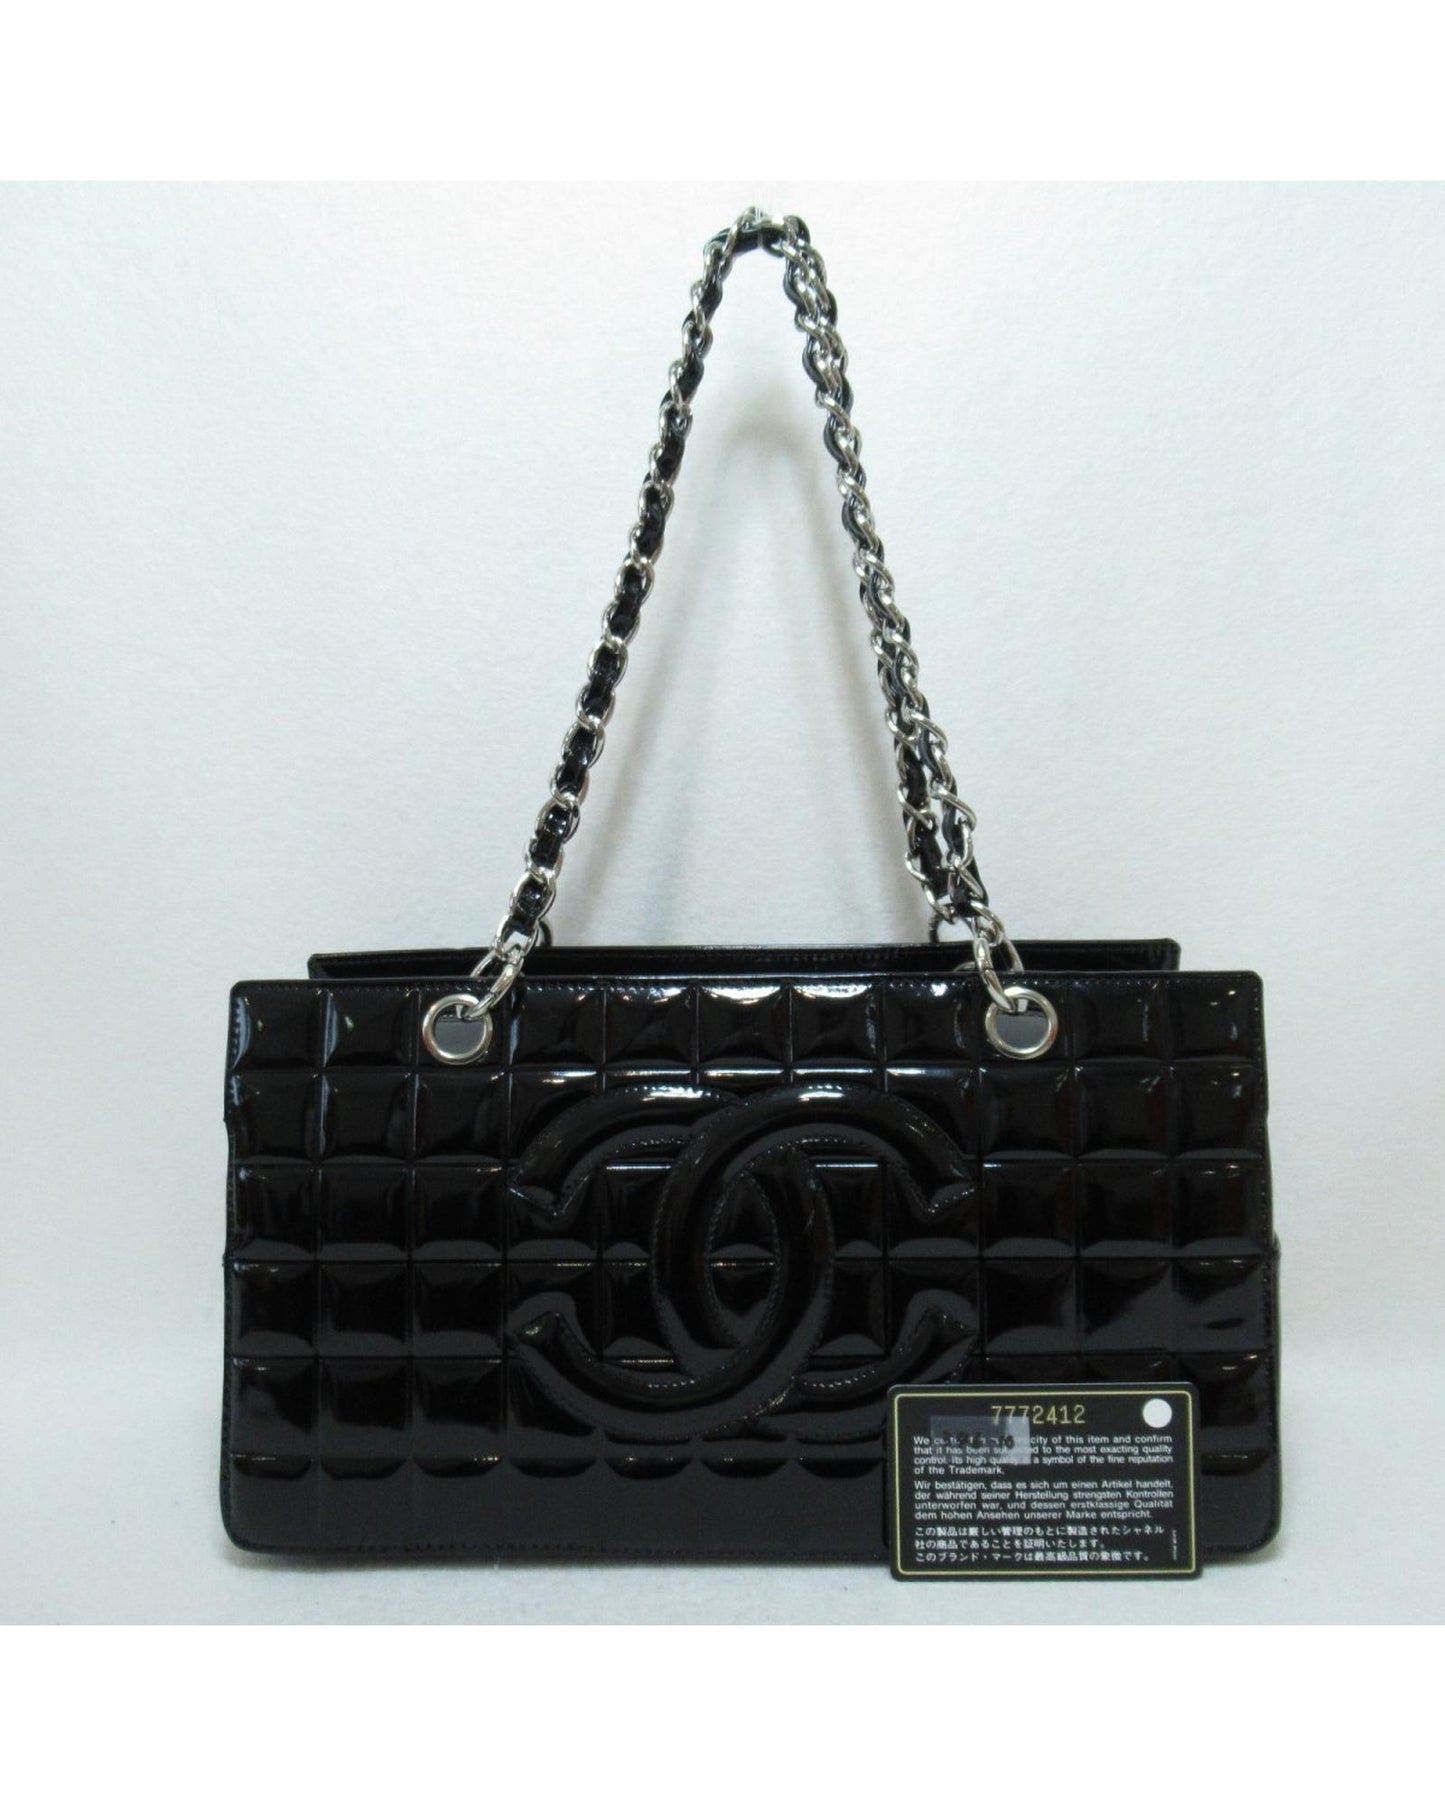 Chanel Women's Patent Leather CC Tote Bag in Black